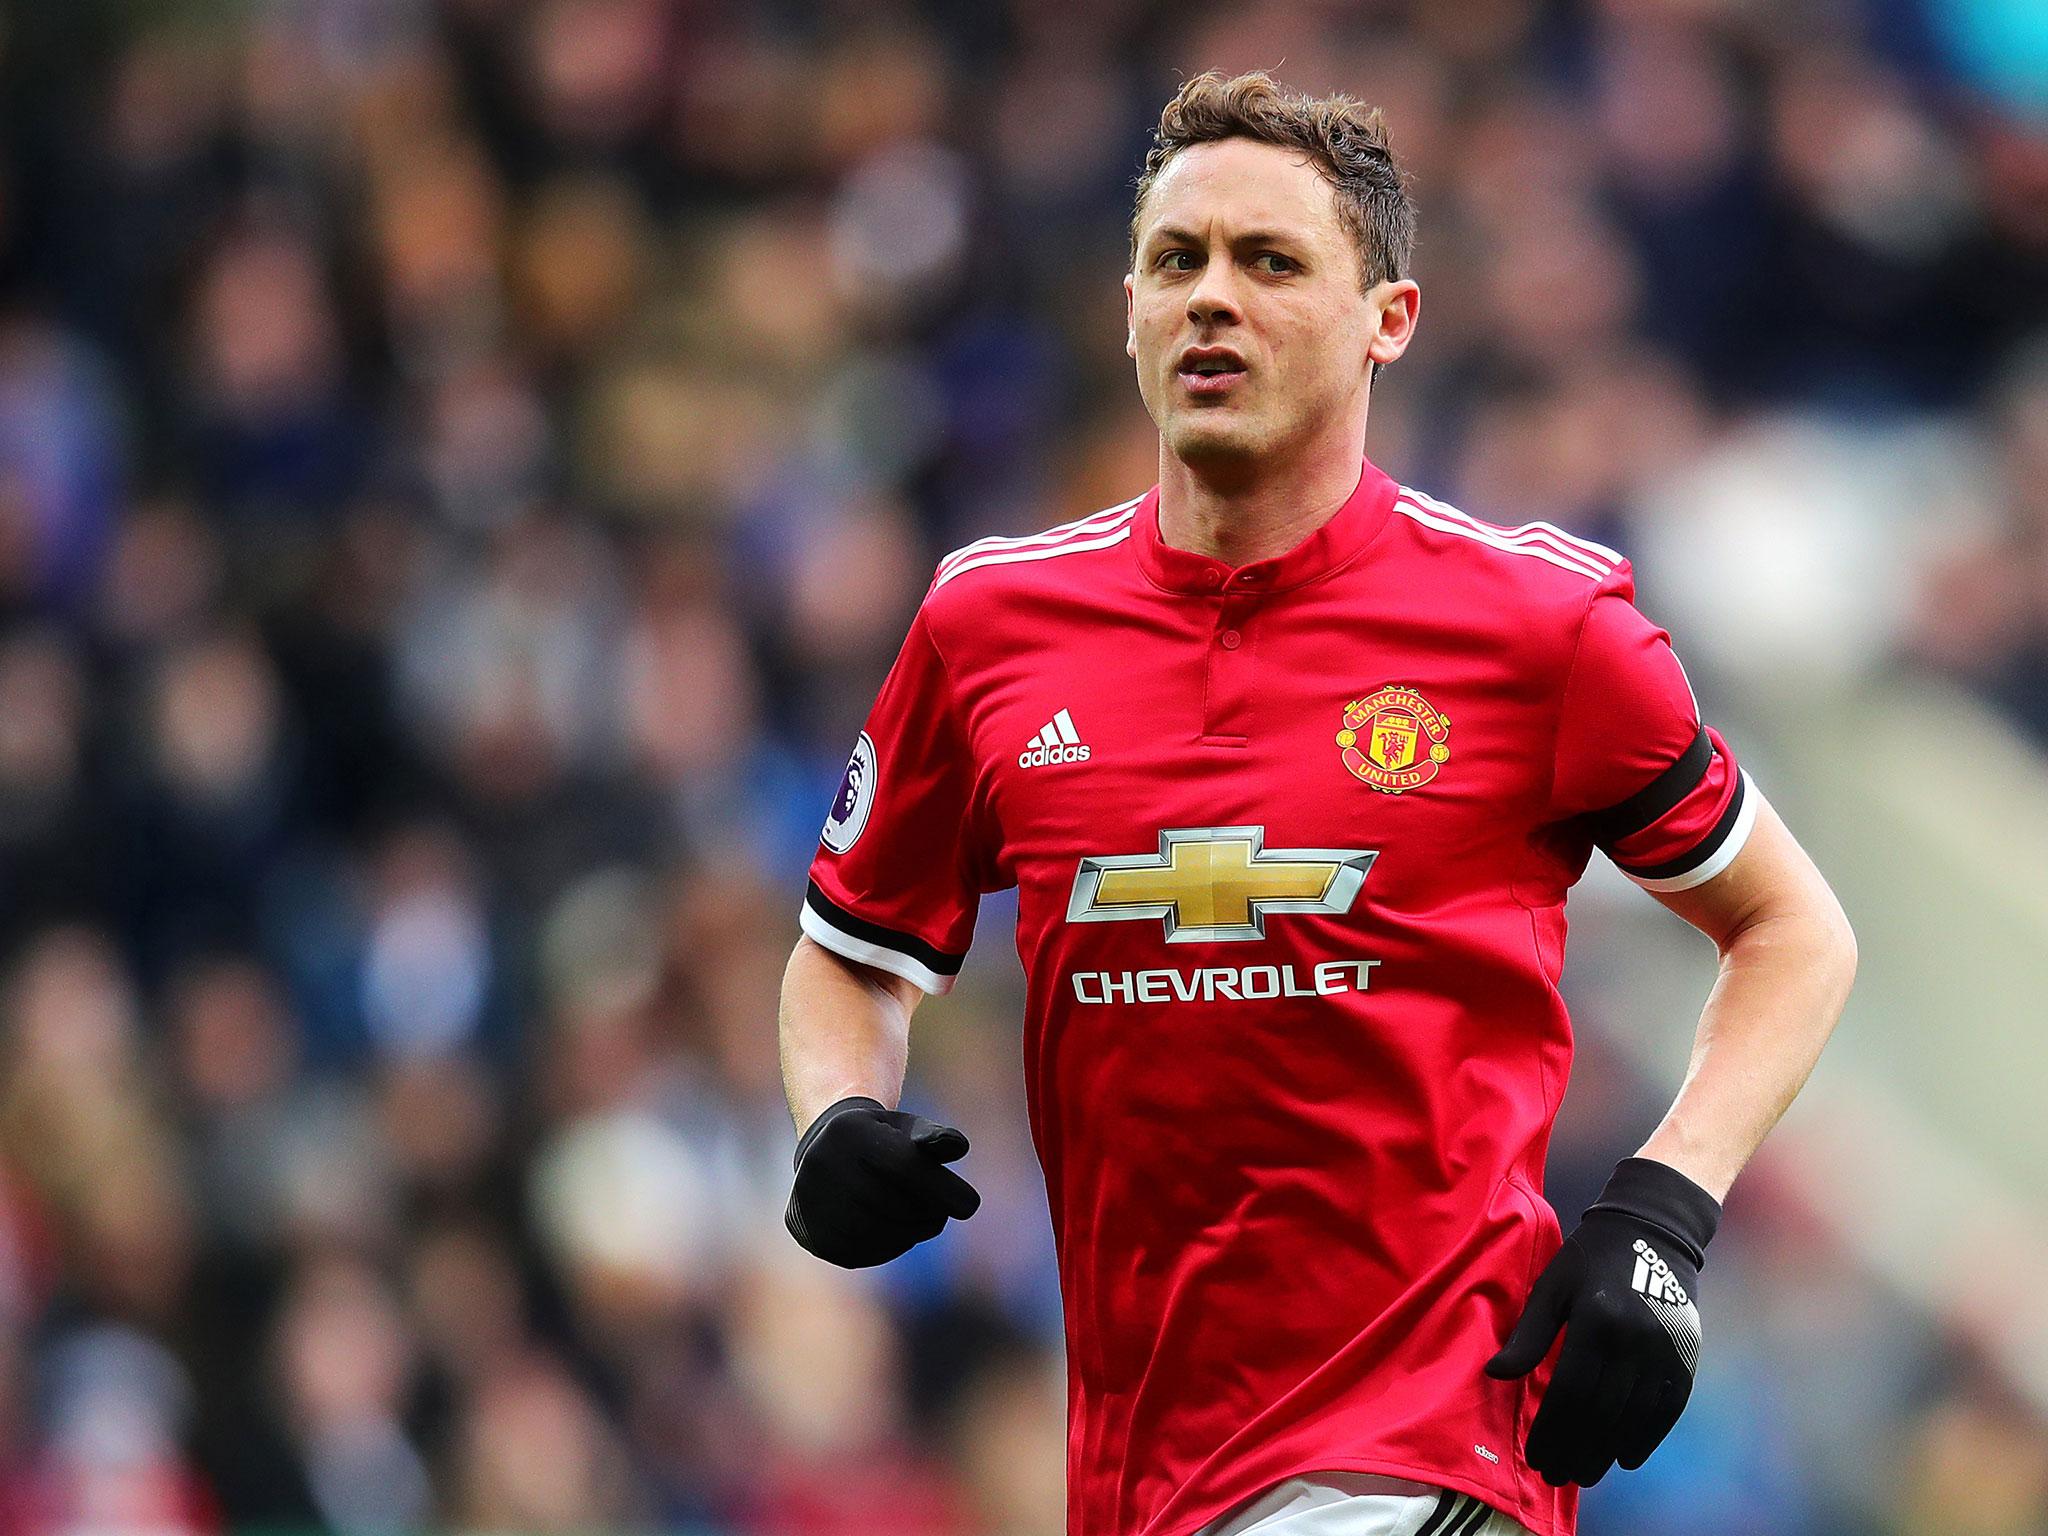 Matic is a trusted figure described by the Portuguese as a 'Jose Mourinho player'